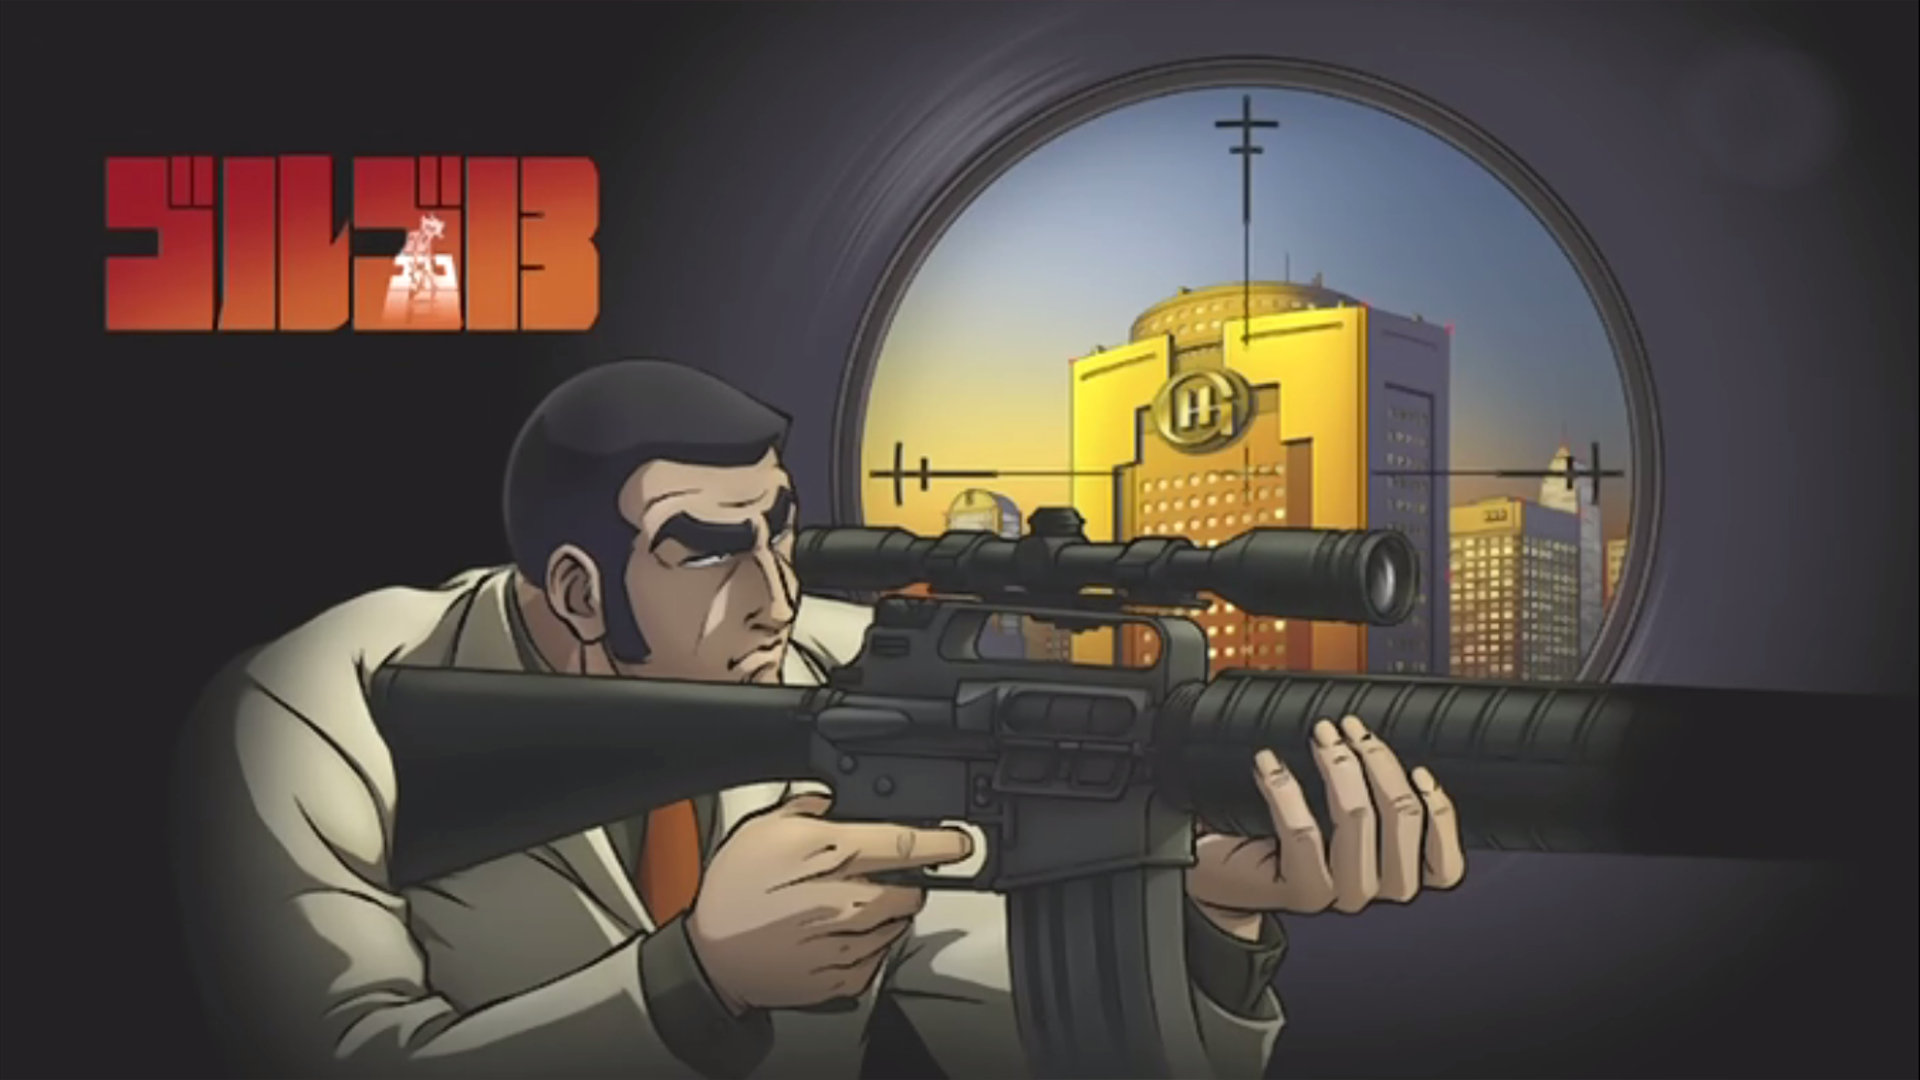 Download full hd 1920x1080 Golgo 13 computer wallpaper ID:144543 for free